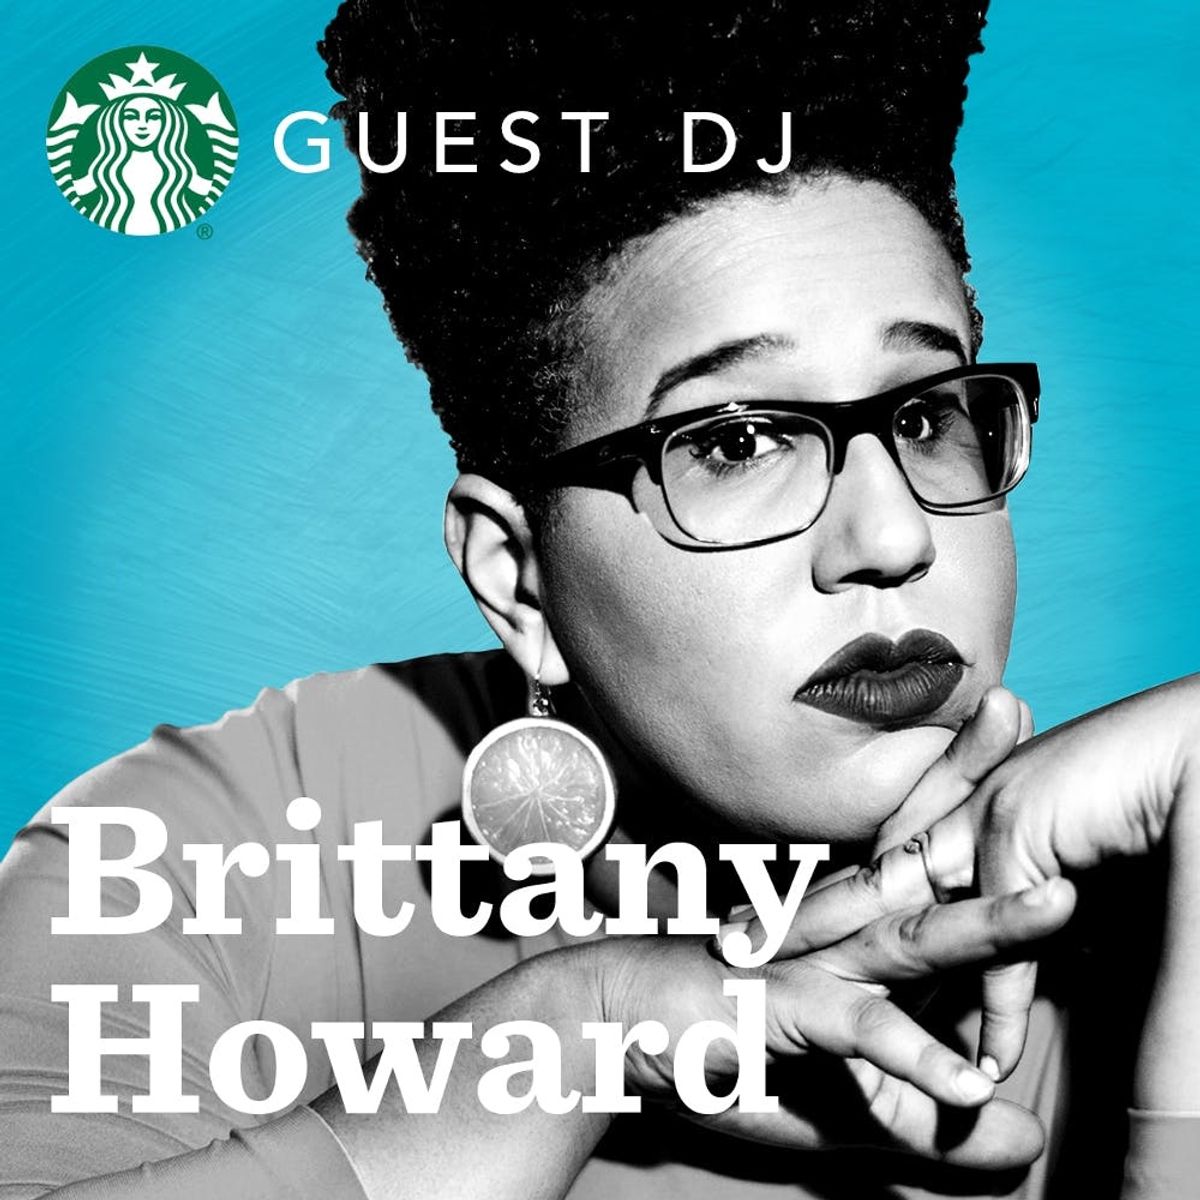 Alabama Shakes Lead Singer Brittany Howard Is Your New Starbucks DJ